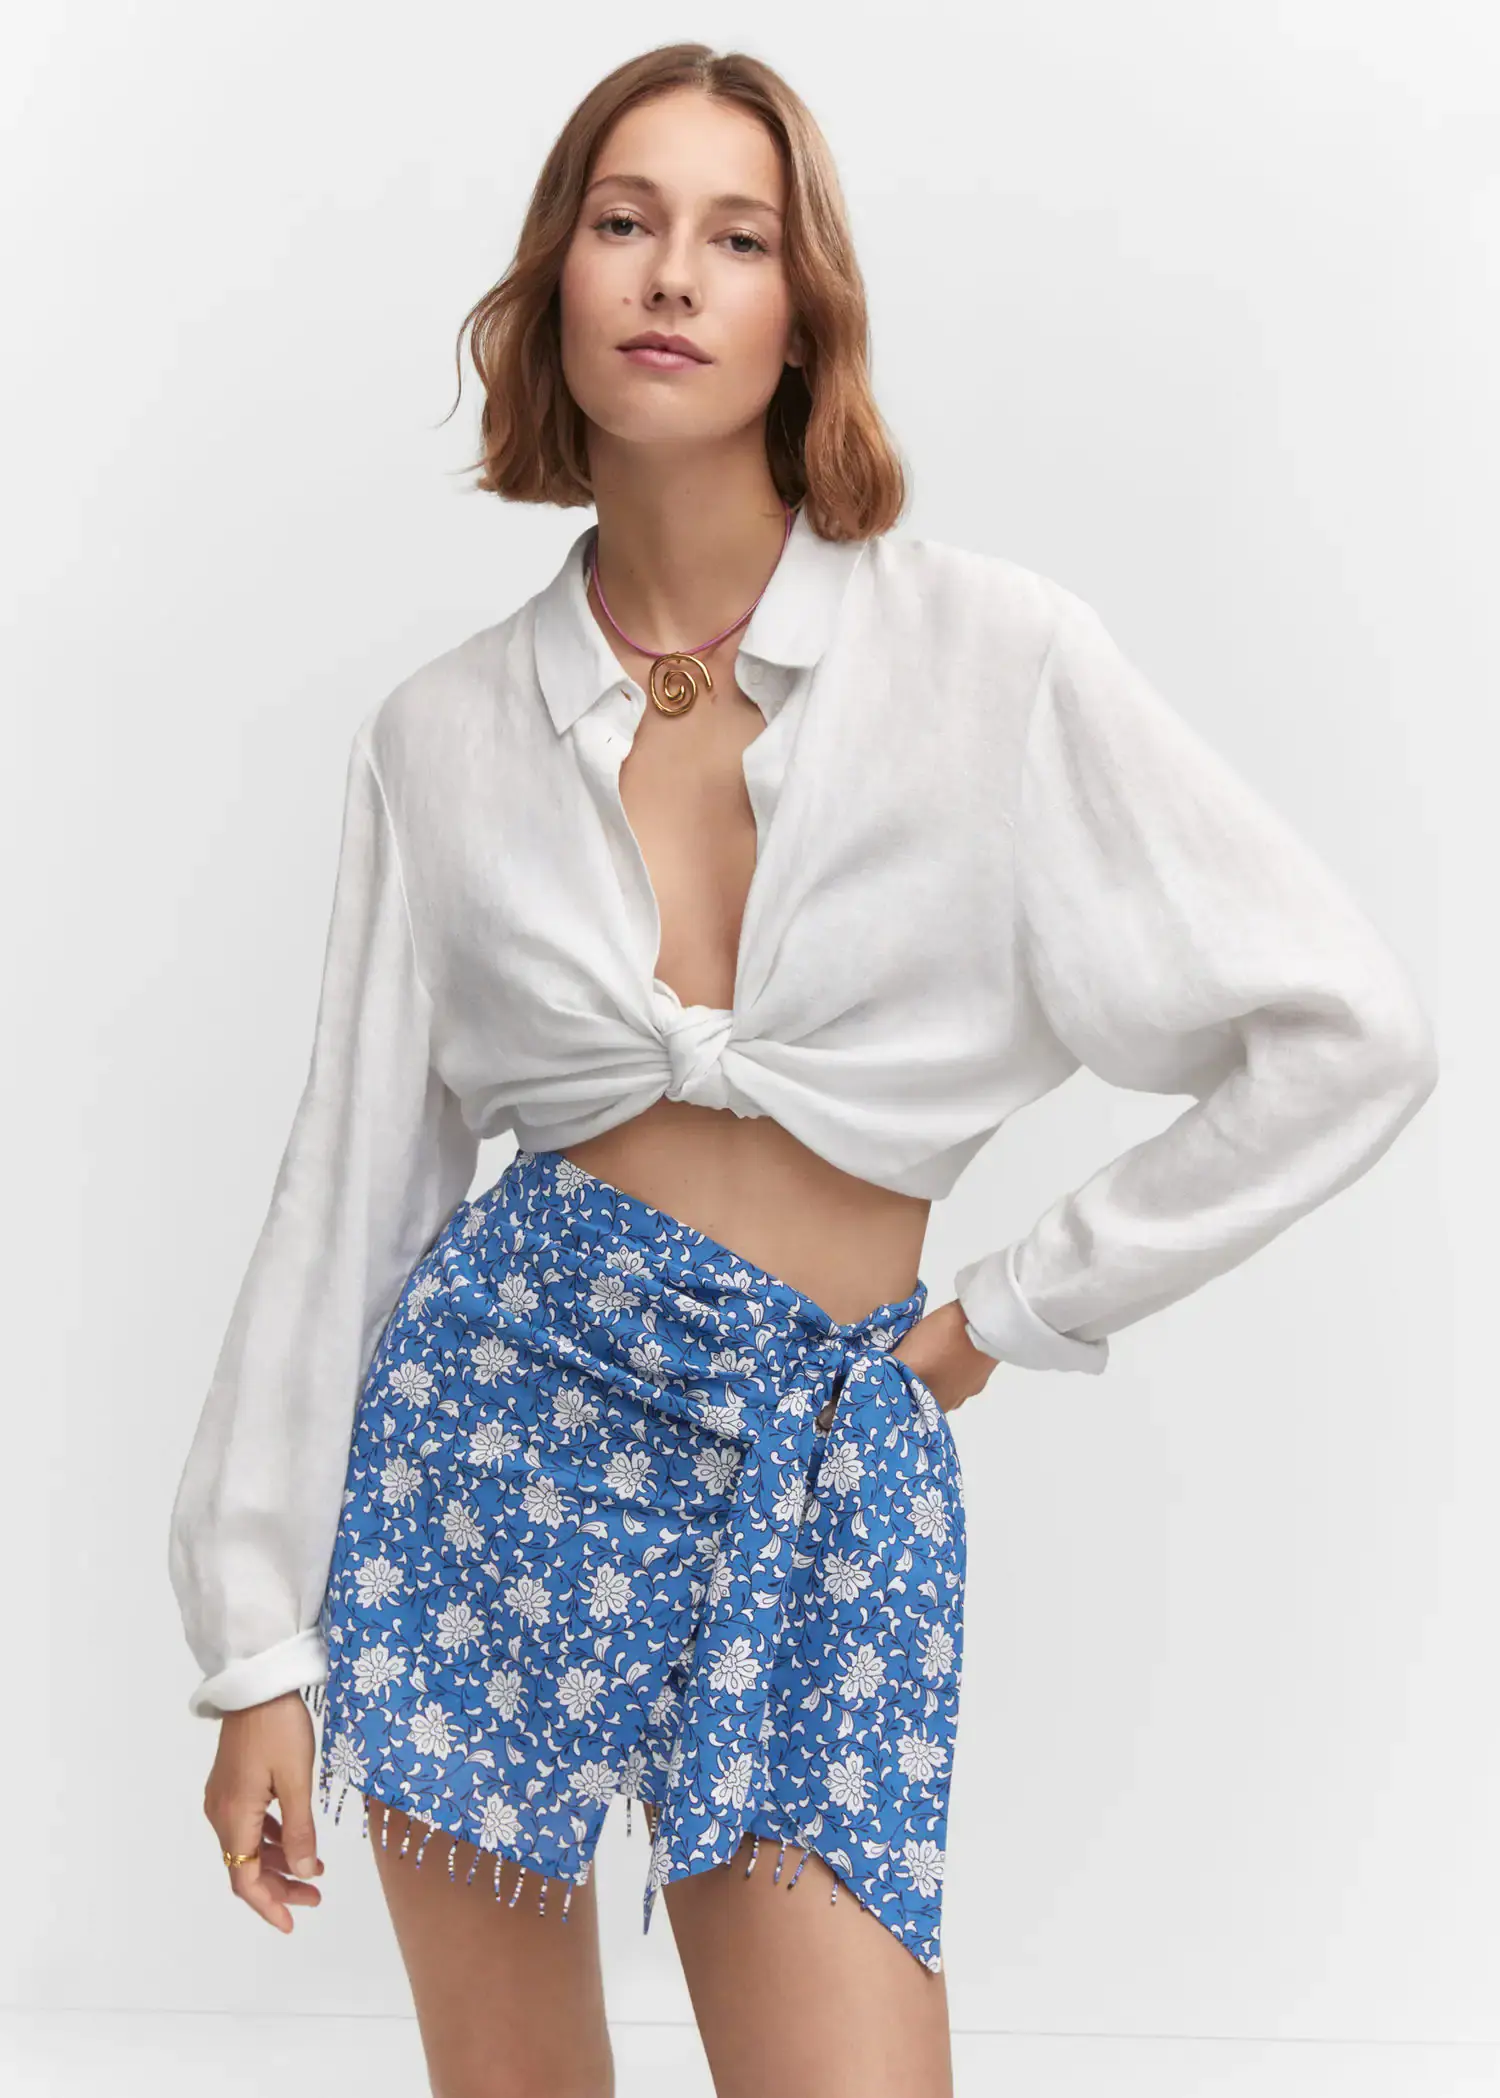 Mango Beaded printed mini-skirt. a woman wearing a white shirt and a blue floral skirt. 